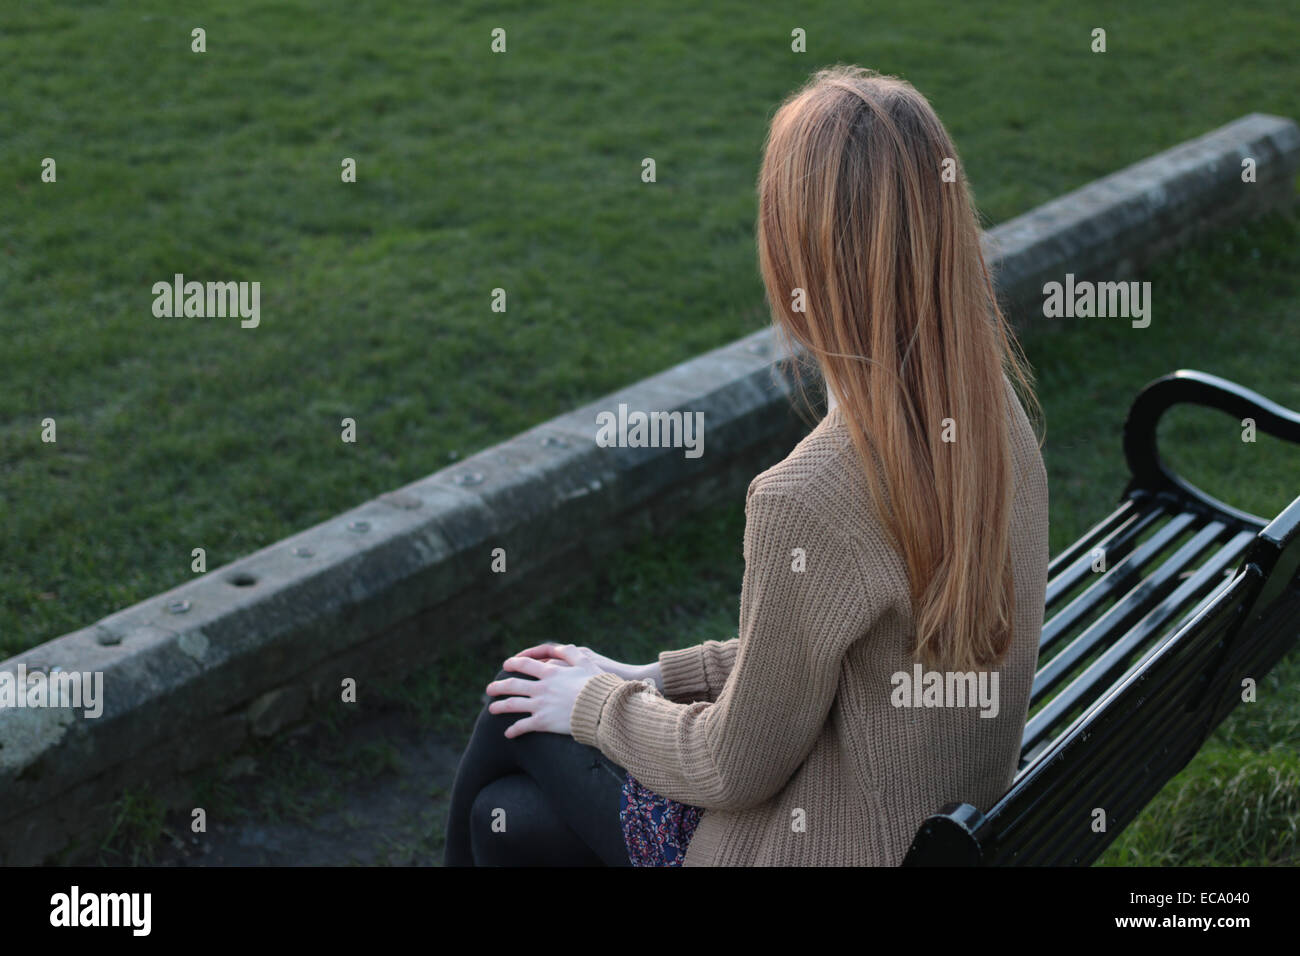 Rear view shot of a young woman sitting on a bench, looking into the distance. Stock Photo